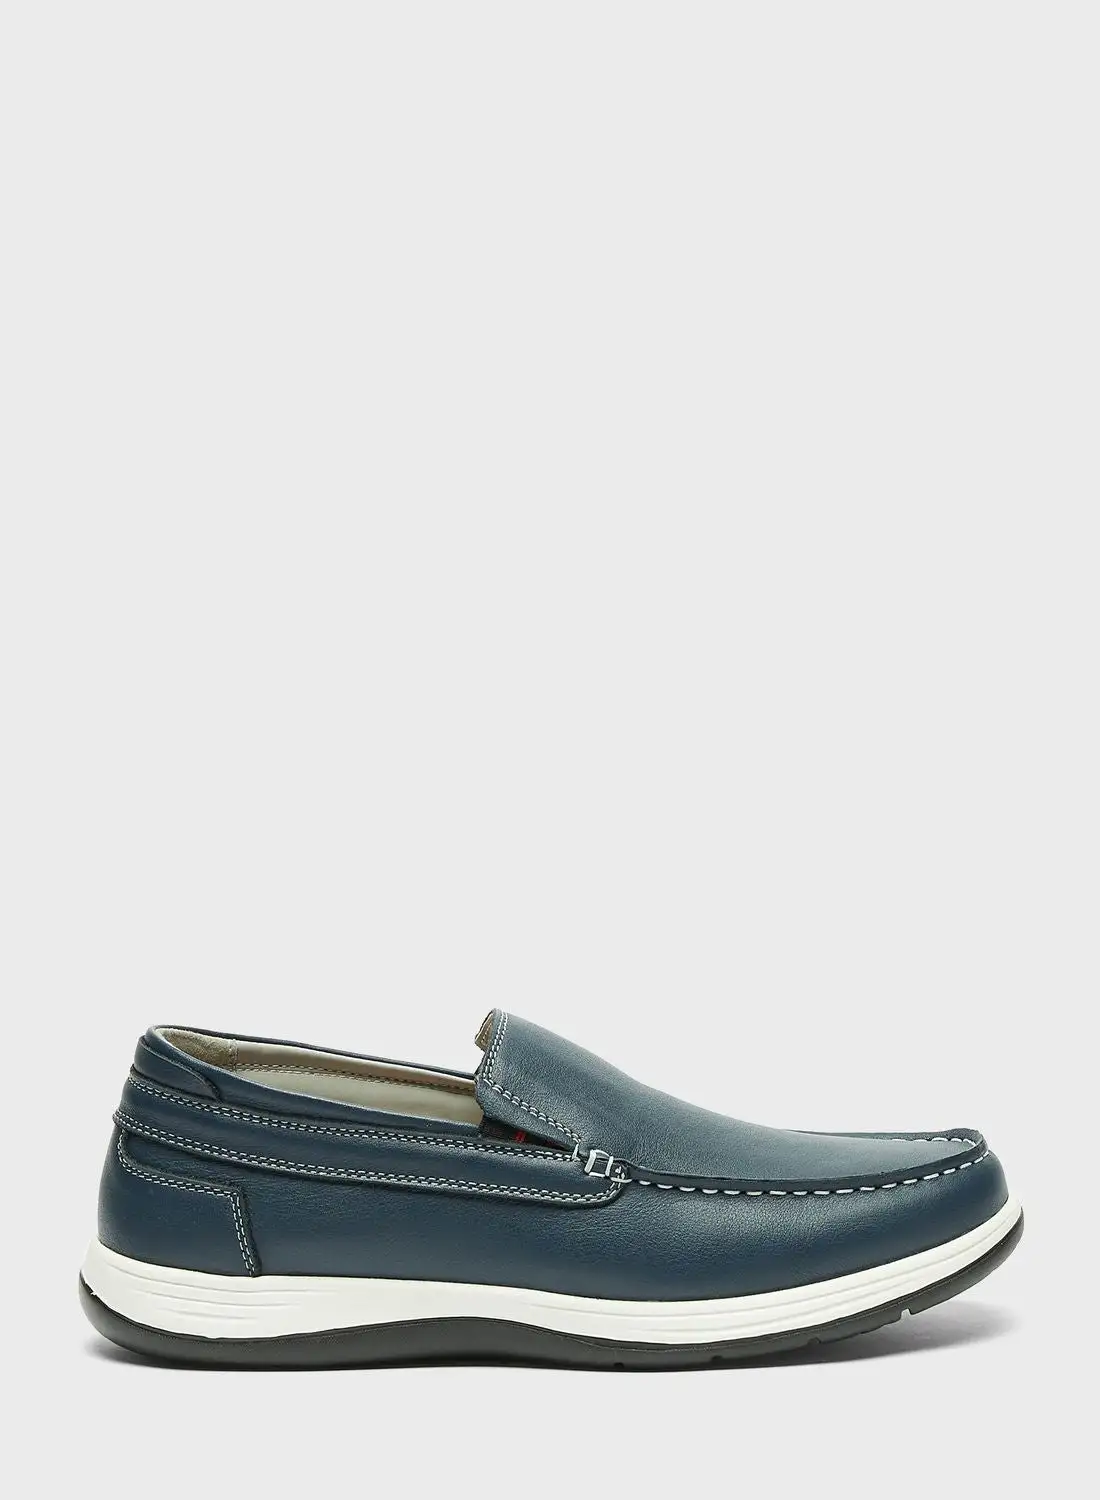 Le Confort Casual Slip On Loafers